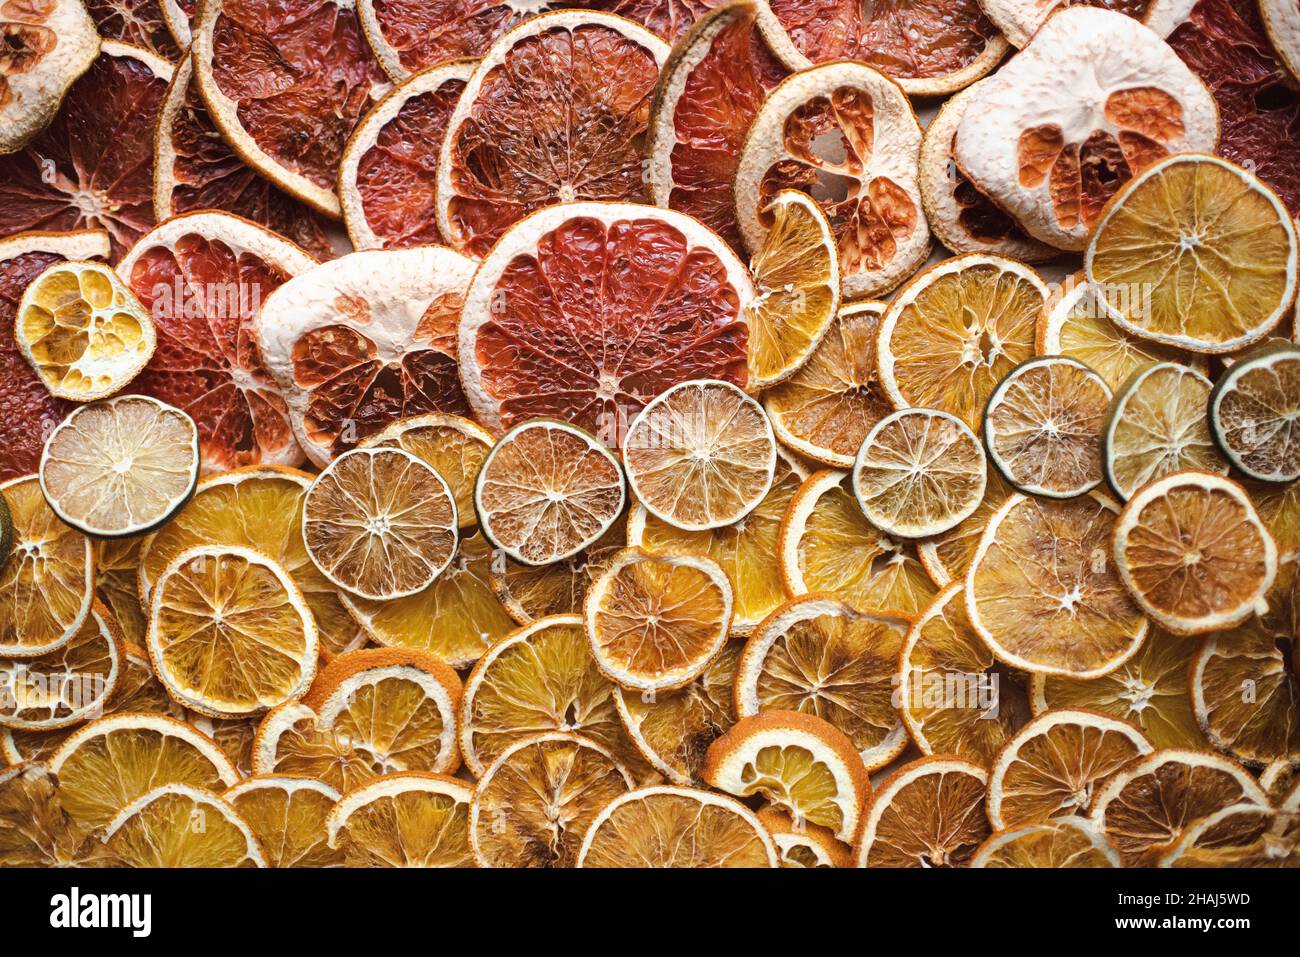 Dried citrus slices, orange, grapefruit and lime, preparing for natural citrus garlands for holiday decoration, winter solstice, yule decor Stock Photo